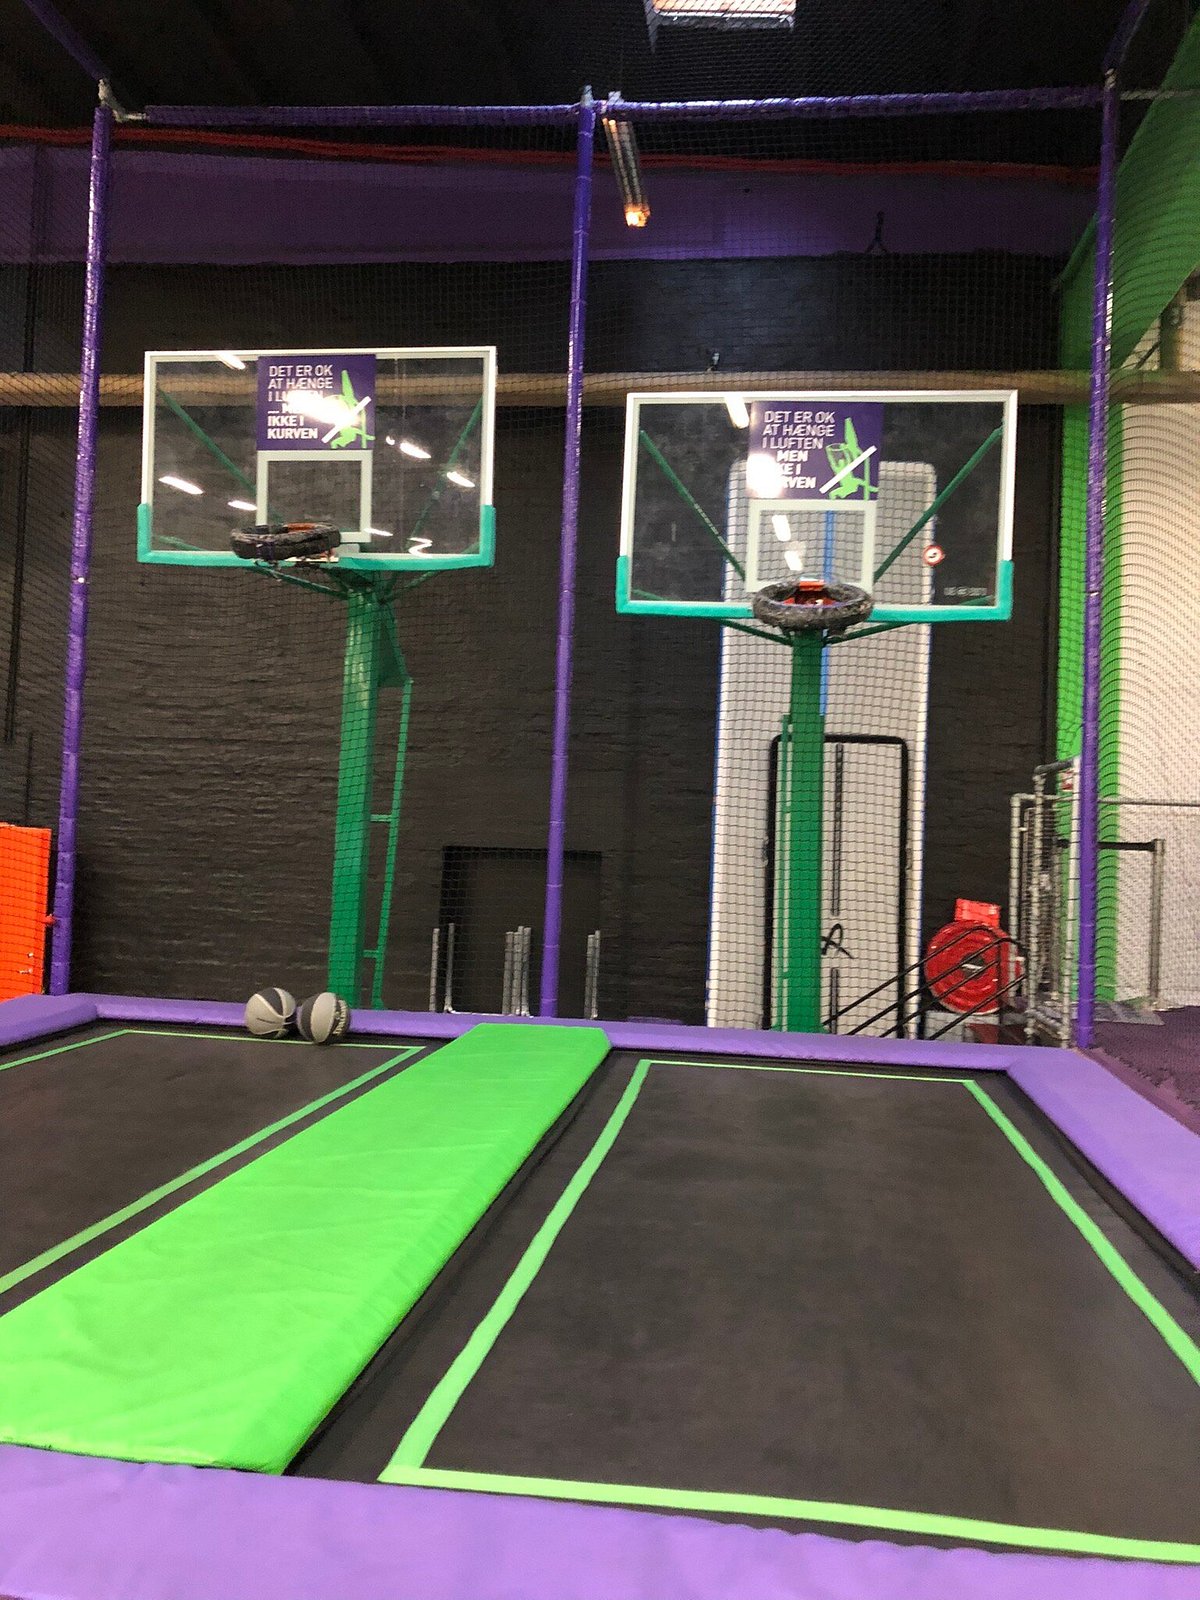 Nogen overrasket Se venligst Jump'it - Kolding Trampolinpark - All You Need to Know BEFORE You Go